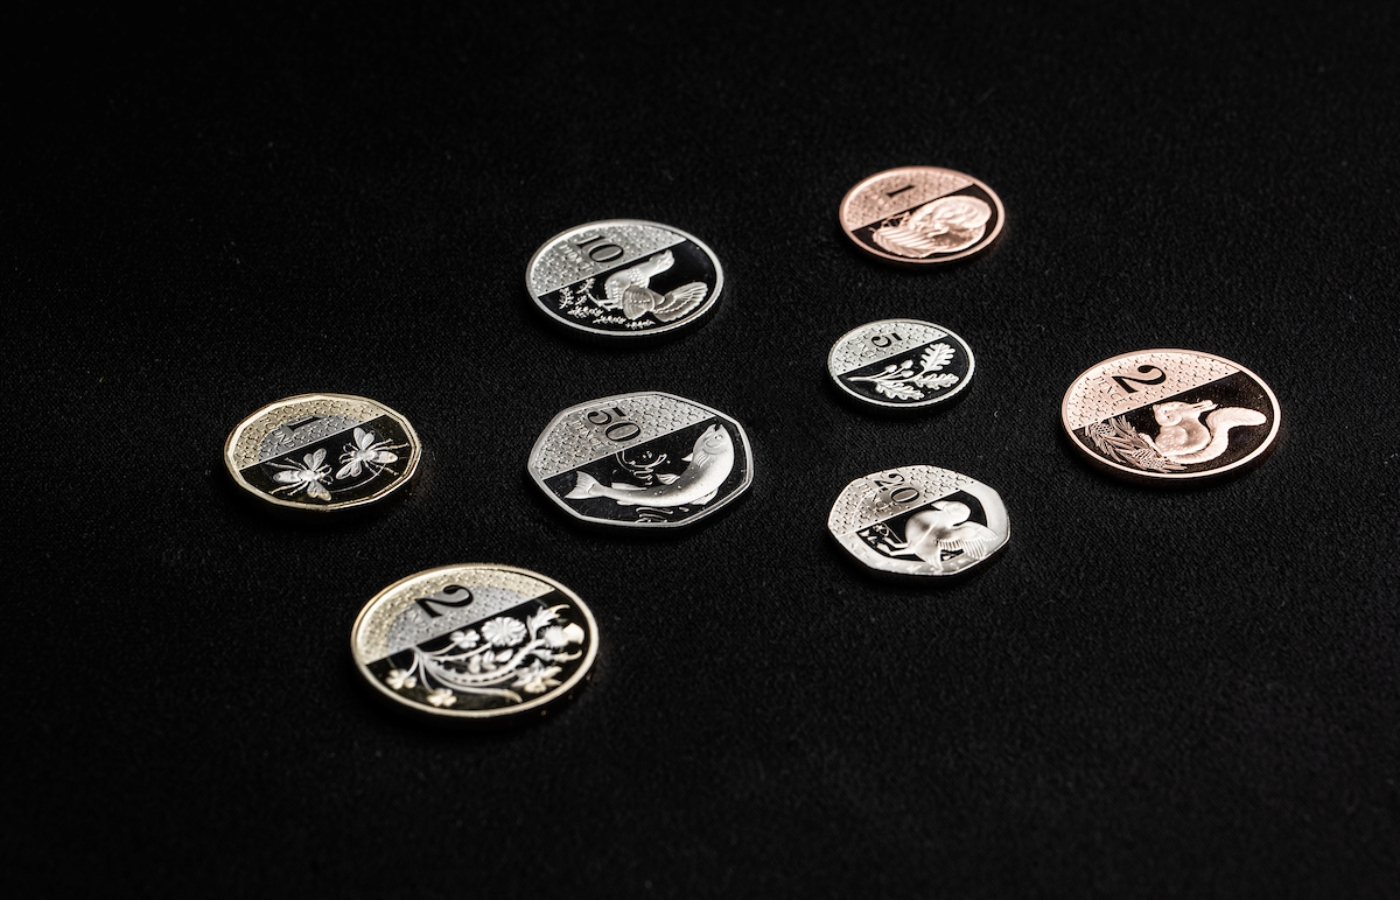 The Royal Mint coin collection celebrating King Charles' passion for conservation.